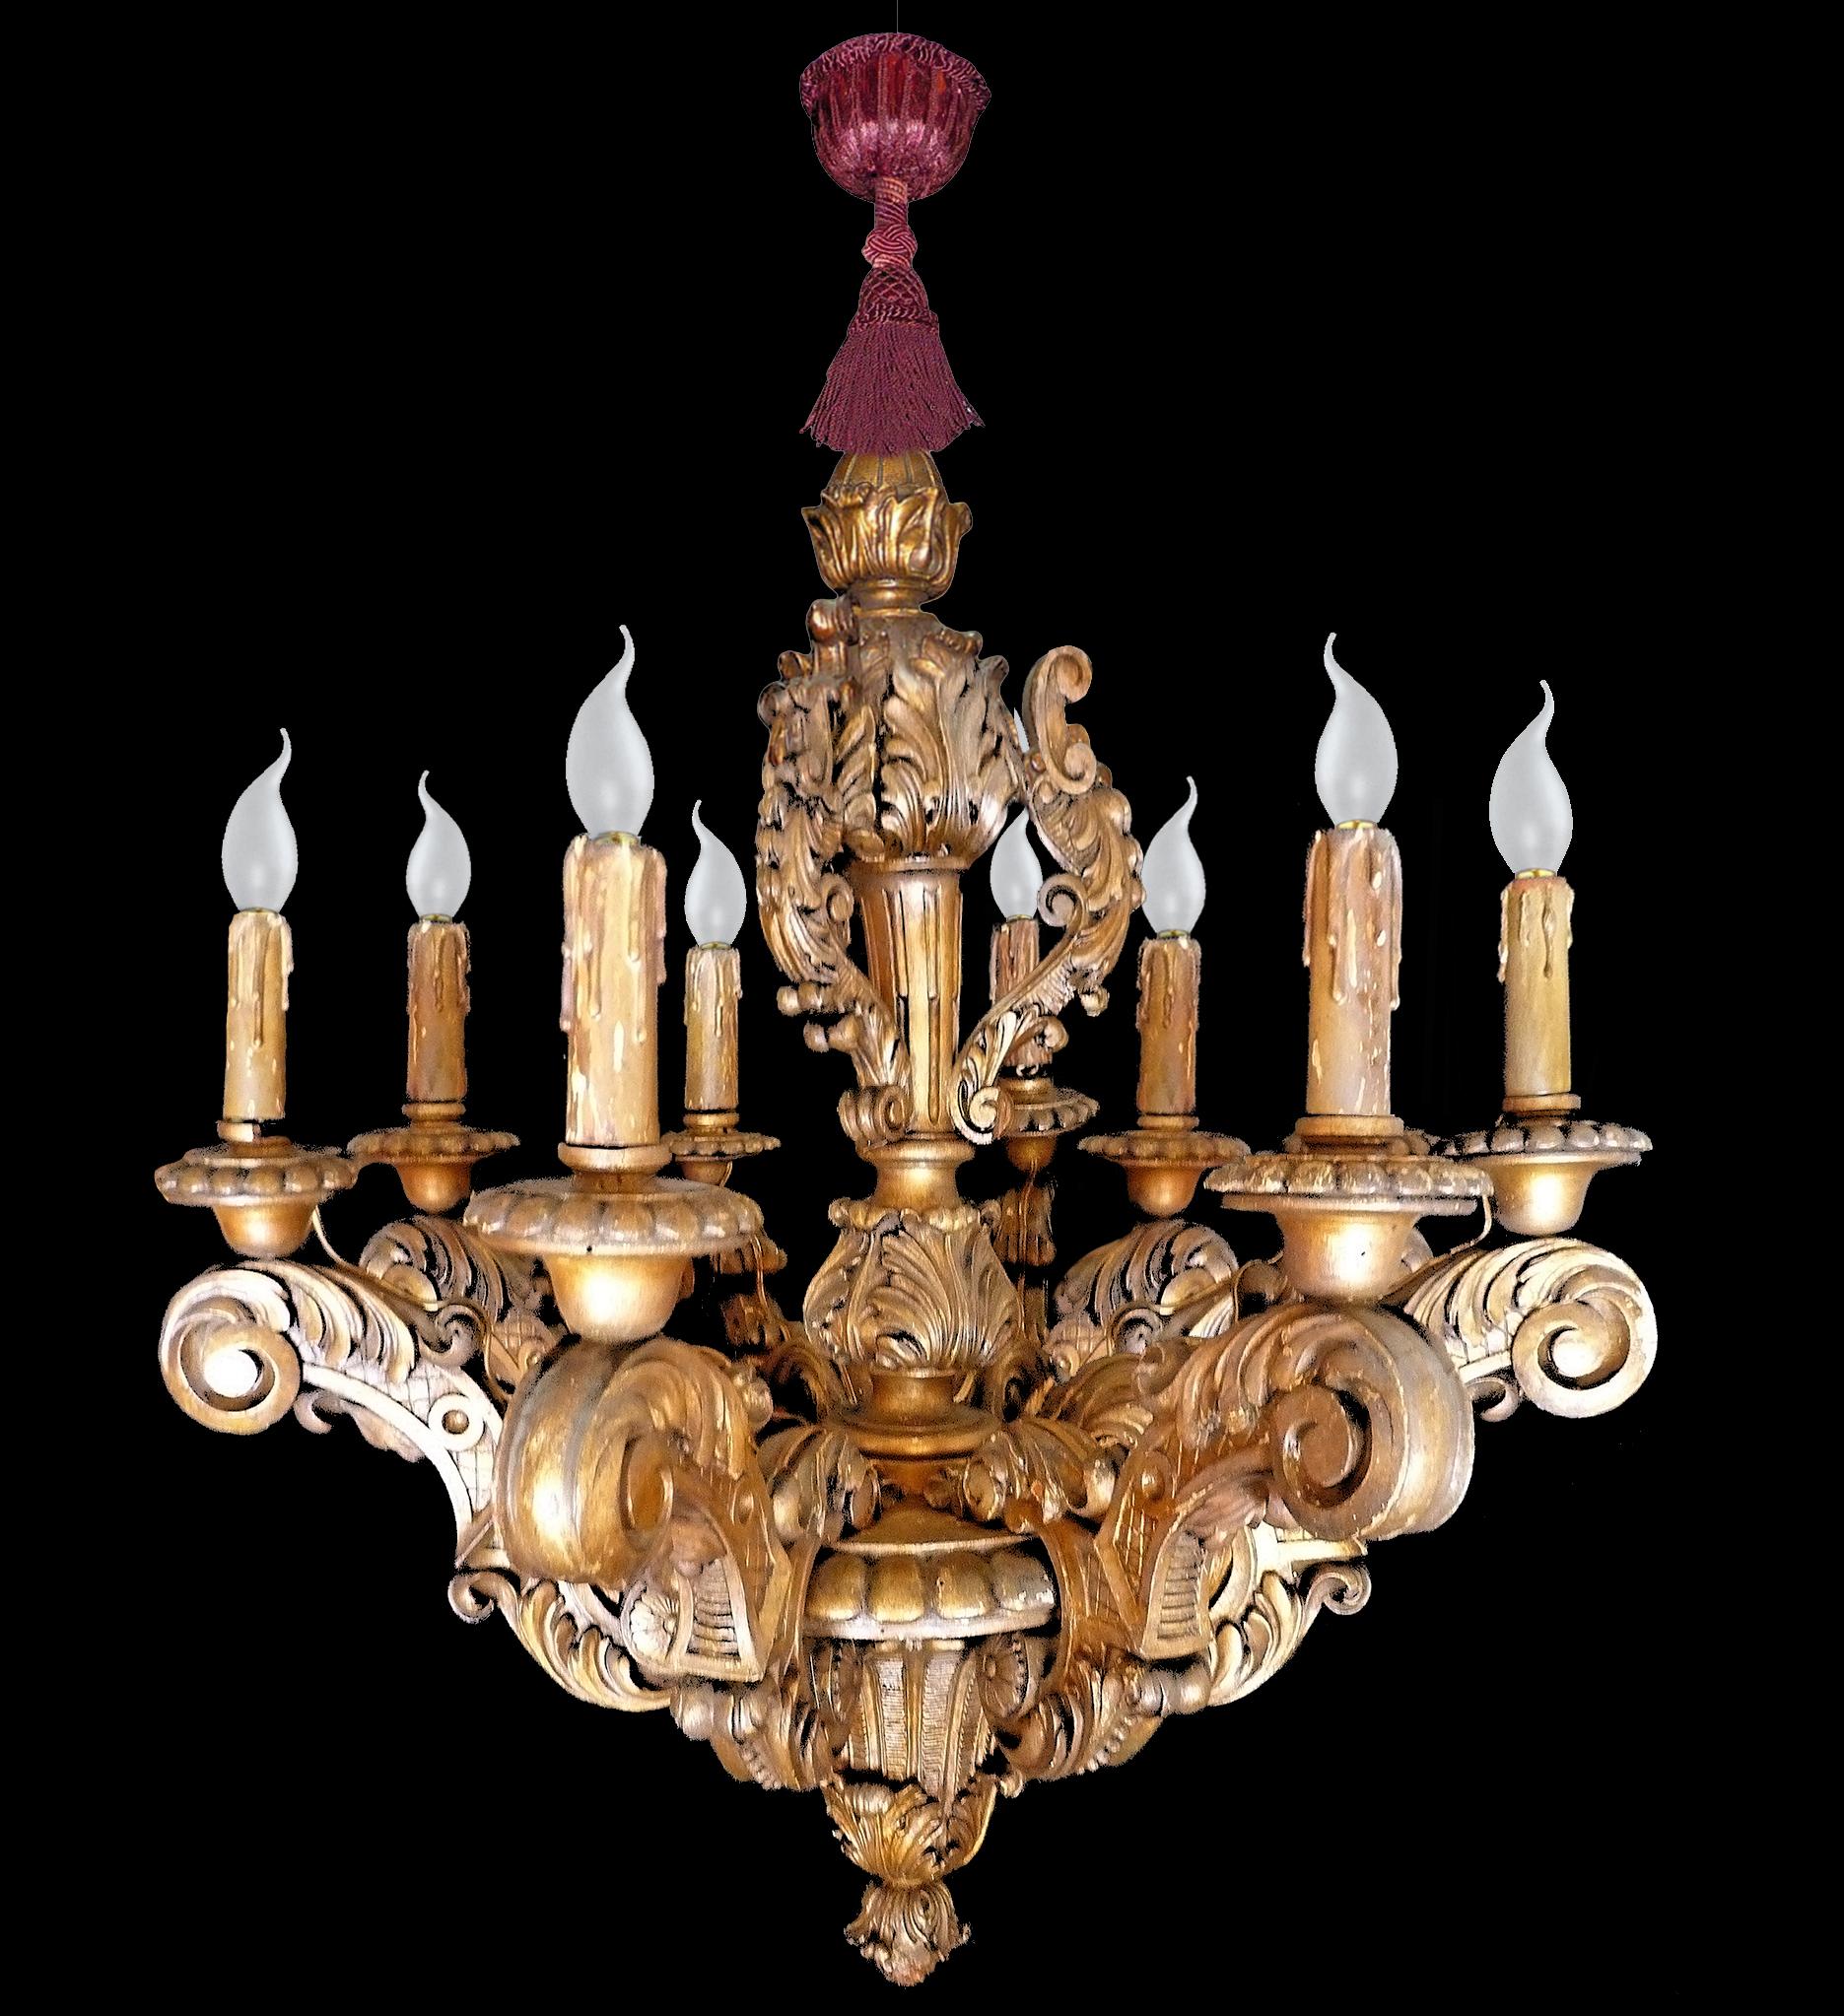 Massive French Louis XV Baroque Gilt Carved Wood 8-Light Chandelier 19th Century In Good Condition For Sale In Coimbra, PT